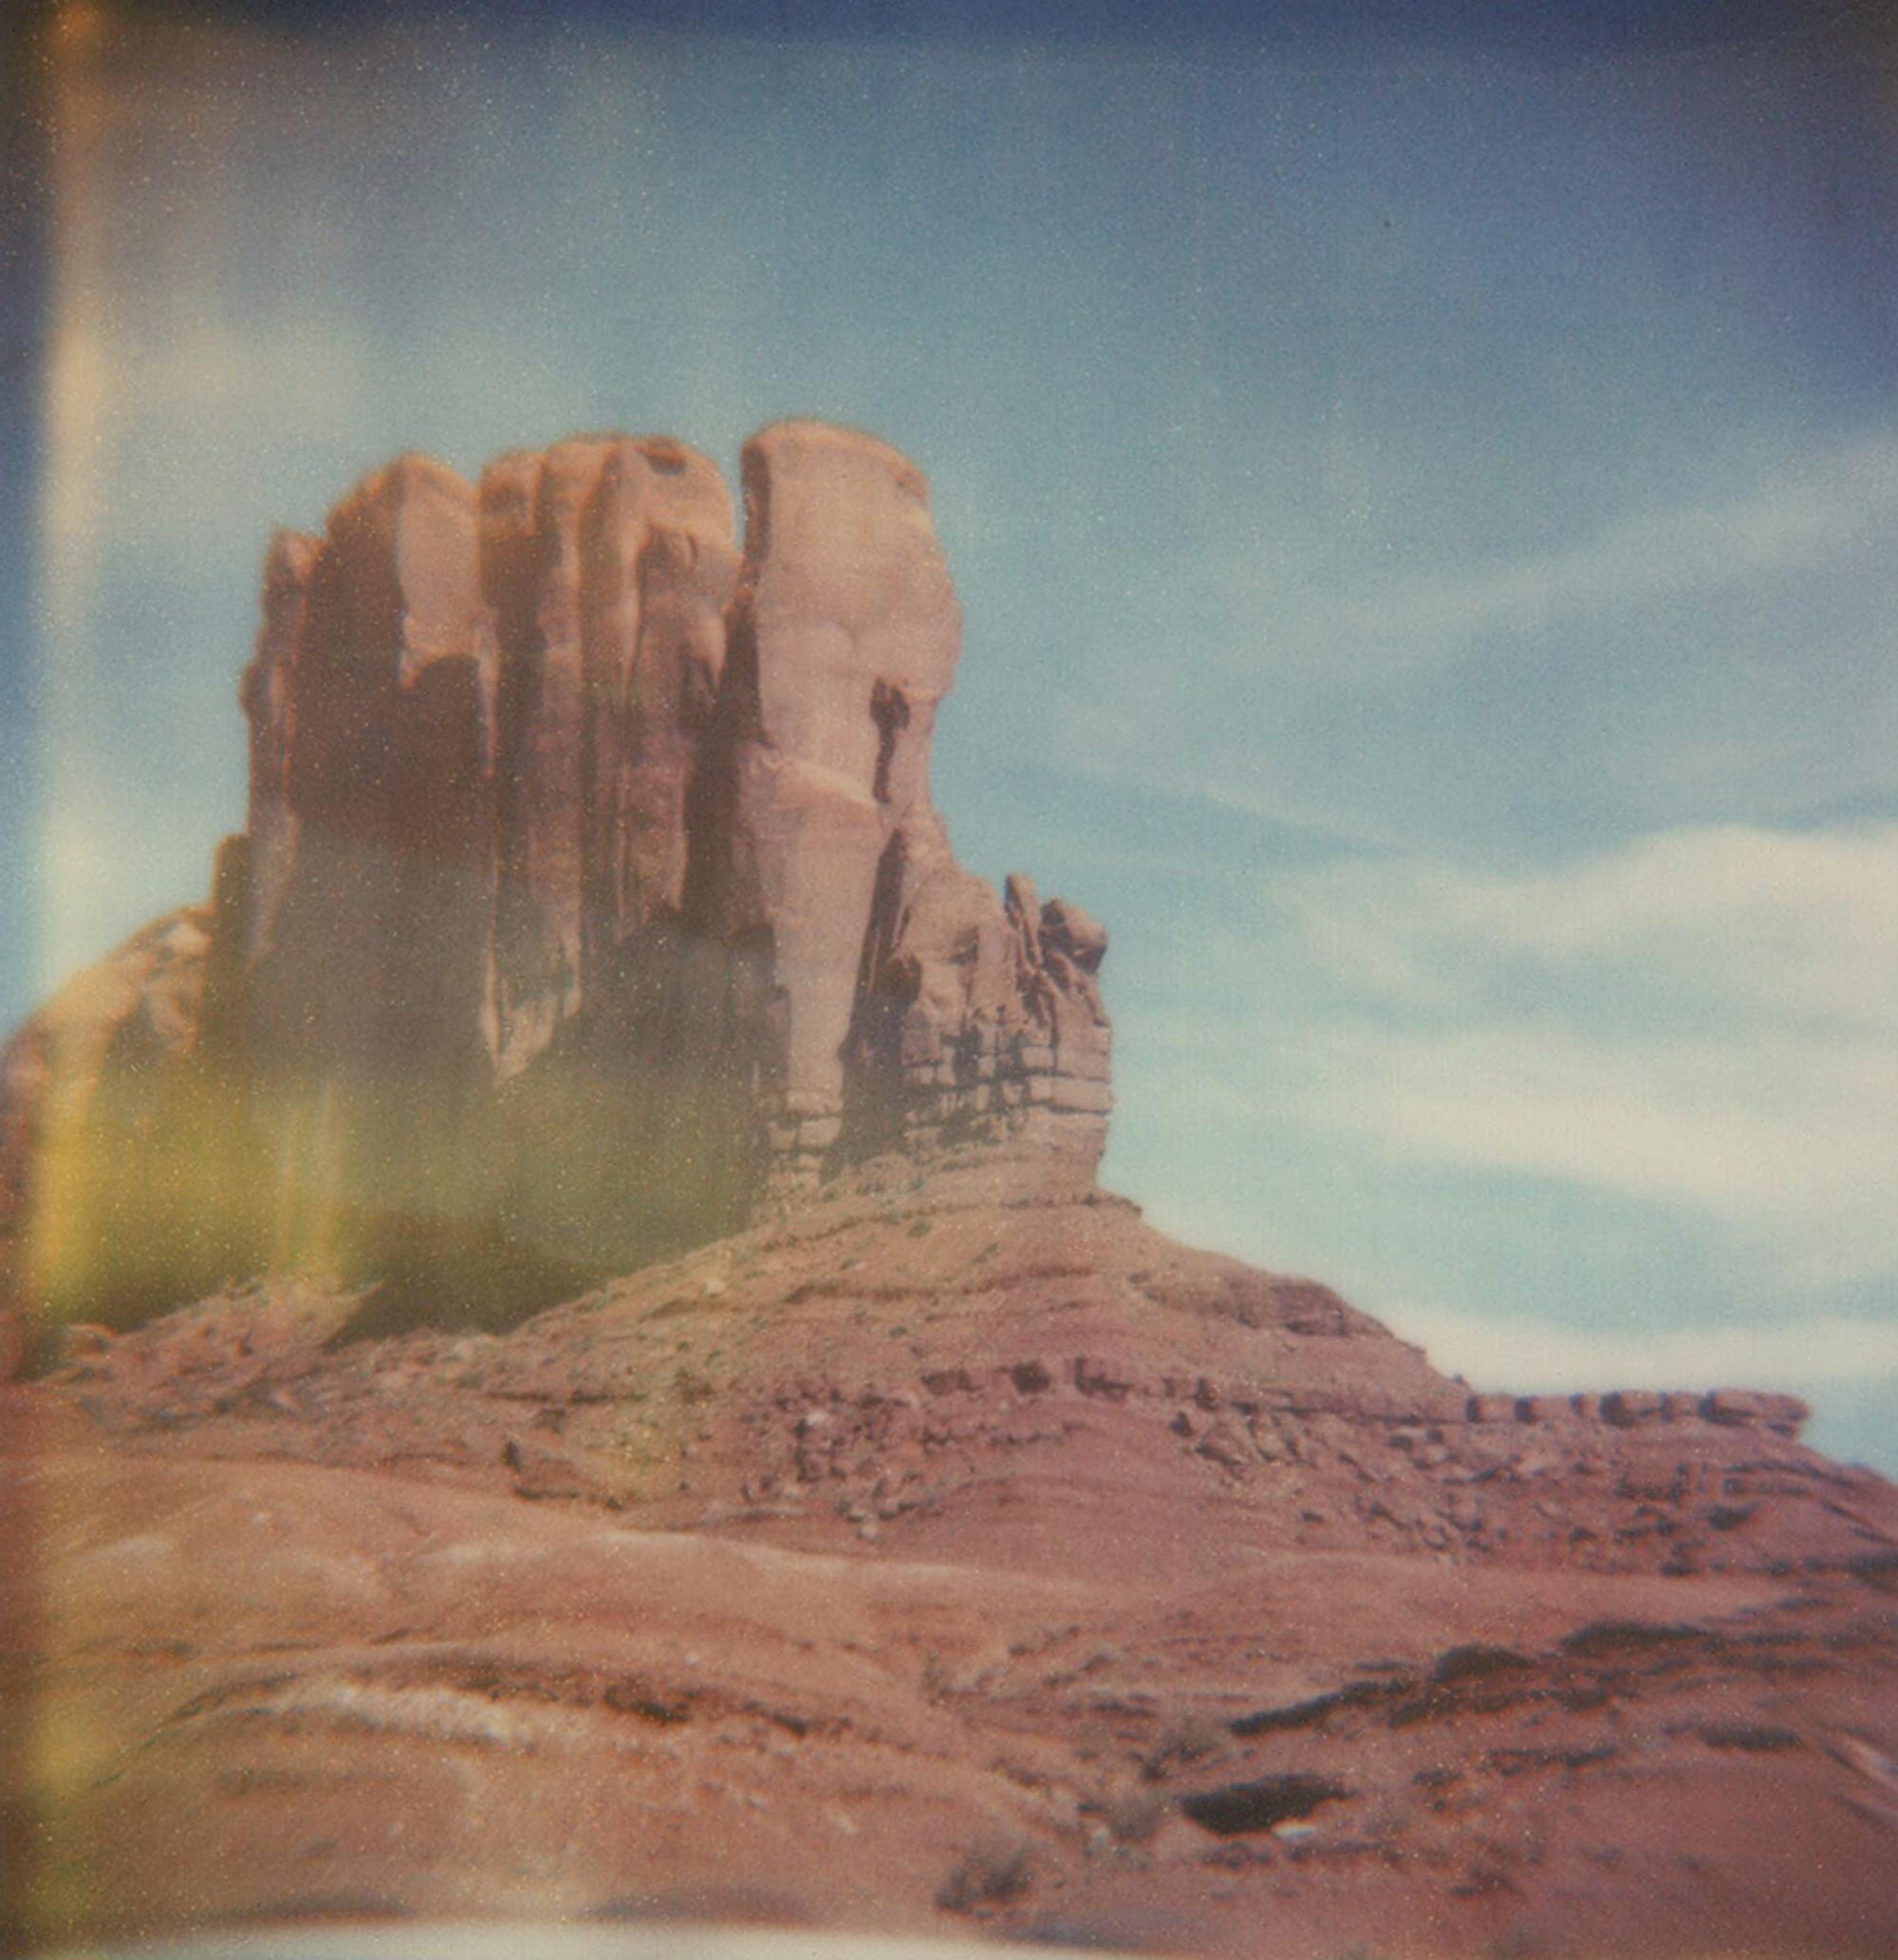 Monument Valley #73 [From the series US Road Trip Diary] - Polaroid, Color